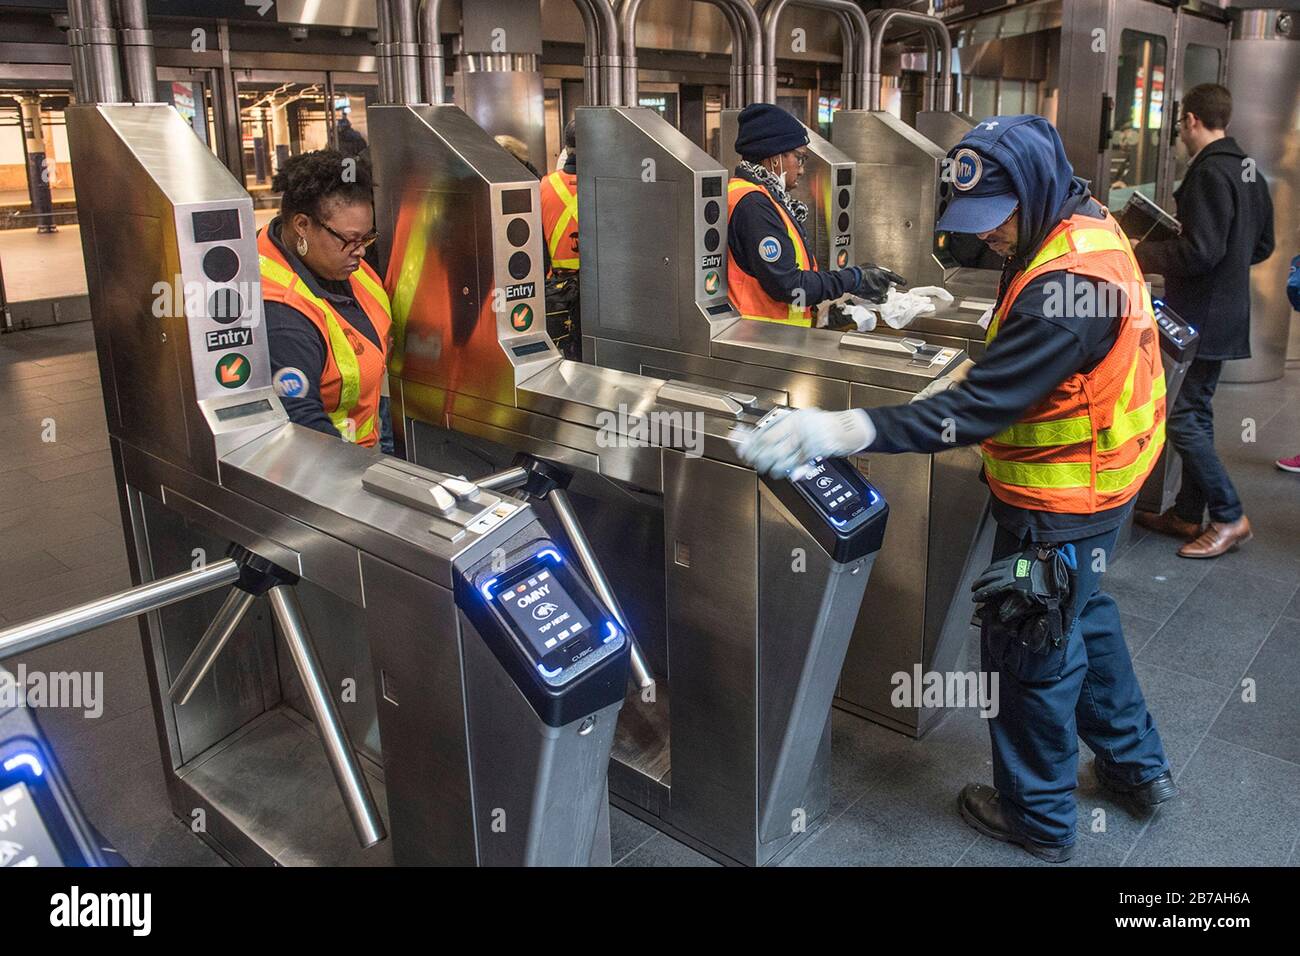 Metropolitan Transportation Authority workers disinfect and sanitizing station turnstiles to prevent the COVID-19, coronavirus in the New York City Transit subway system March 12, 2020 in New York City, New York. Stock Photo